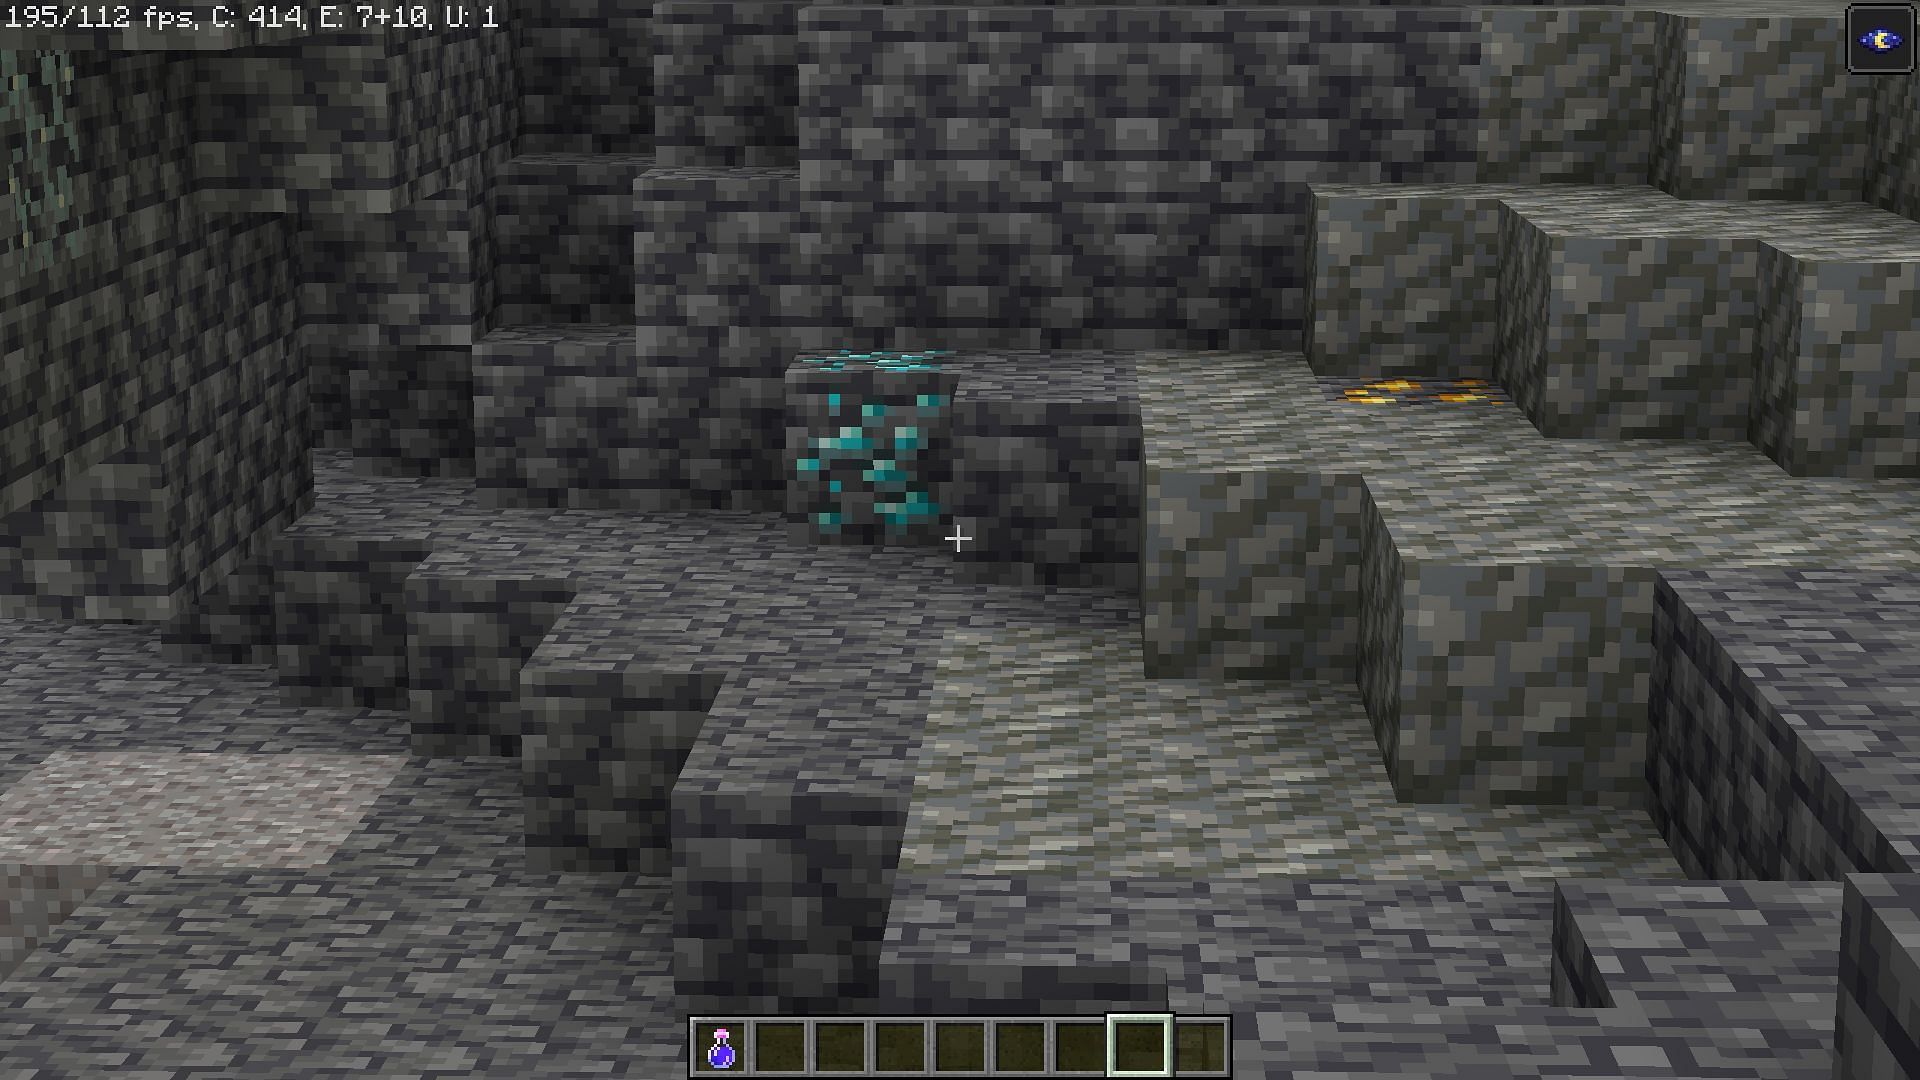 Diamond ores are most common at Y level -58 (Image via Mojang)